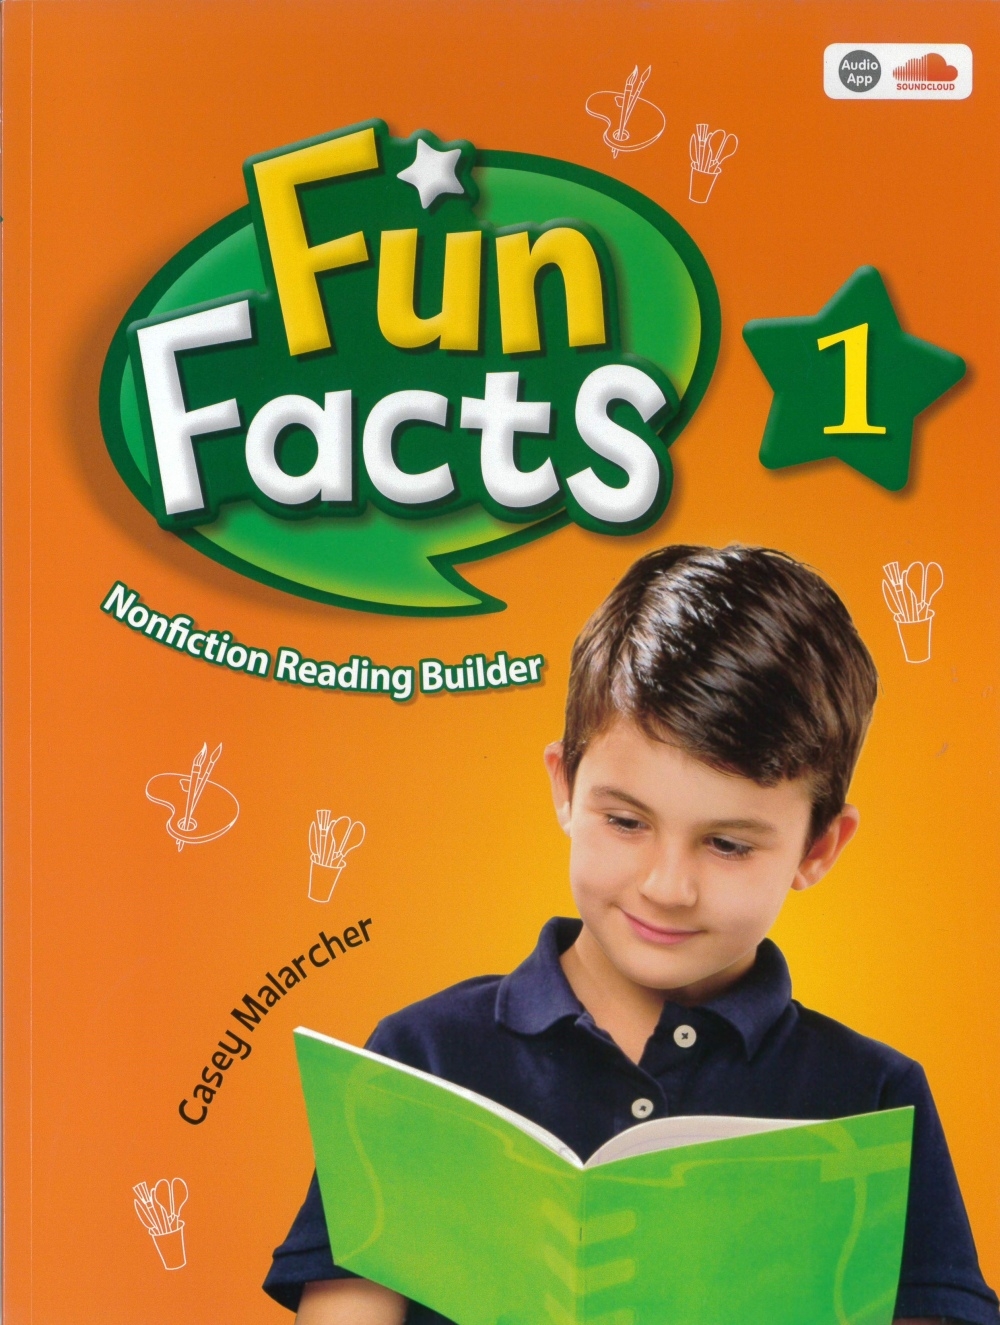 Fun Facts (1) Student Book with Audio App and Workbook